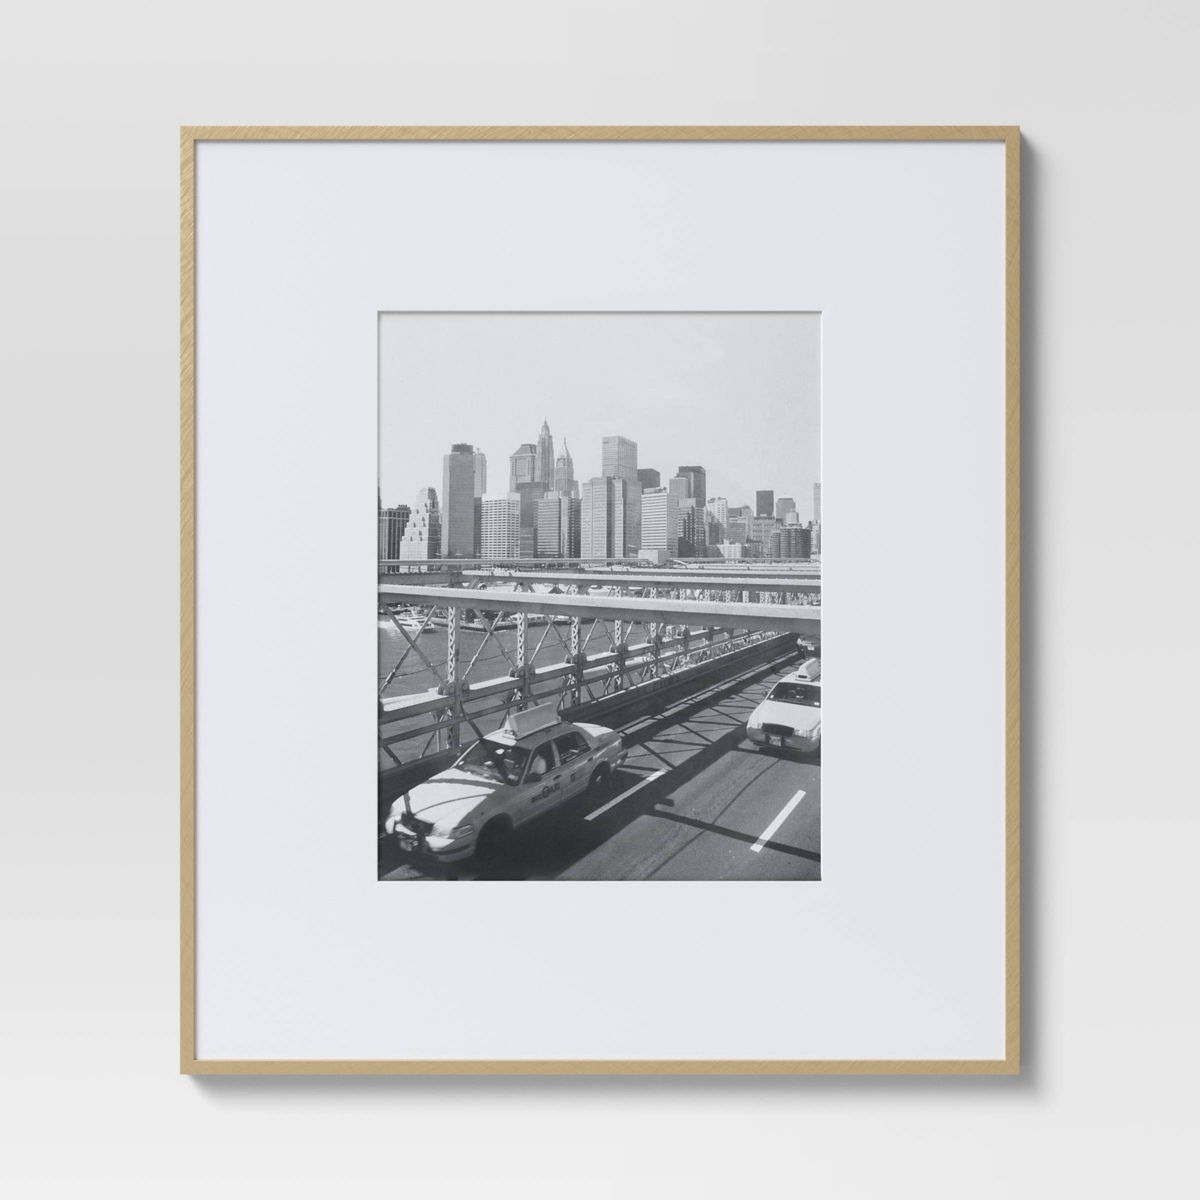 19.4" x 22.4" Matted to 11" x 14" Thin Gallery Oversized Image Frame Brass - Threshold™ | Target